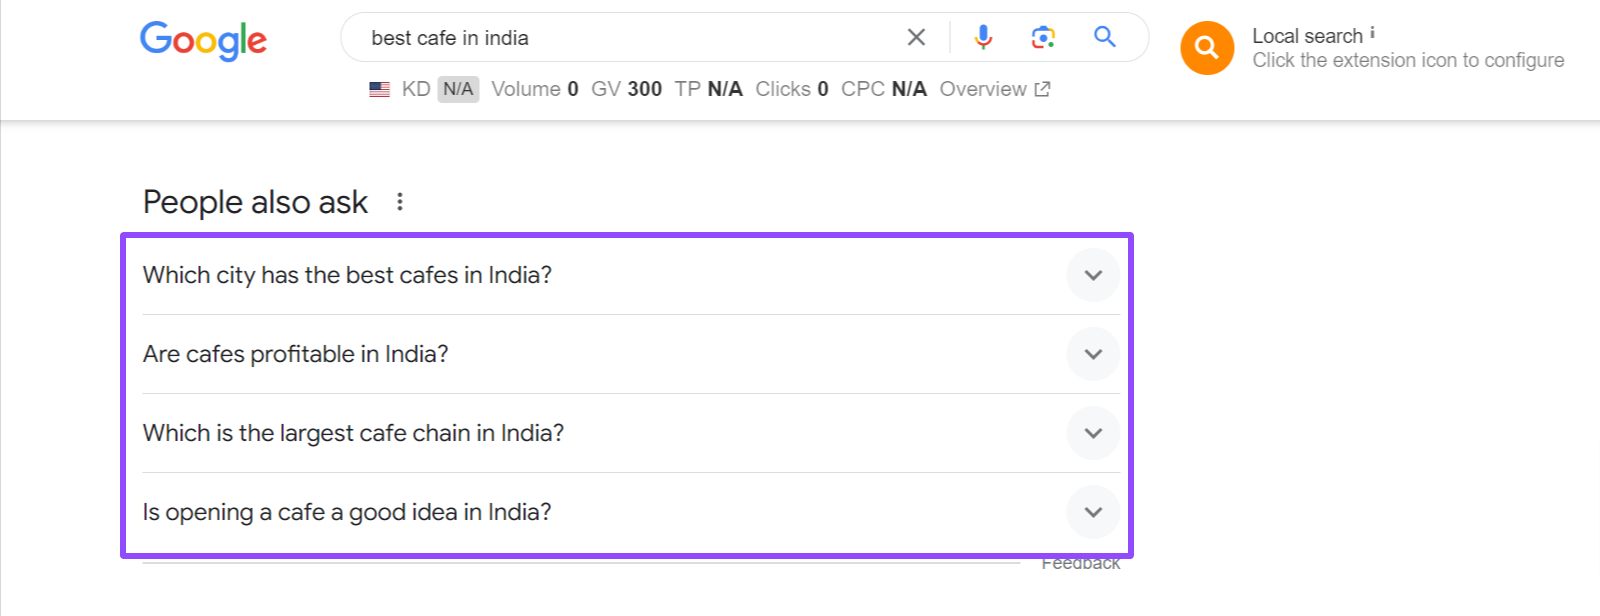 related searches regarding best cafe in india